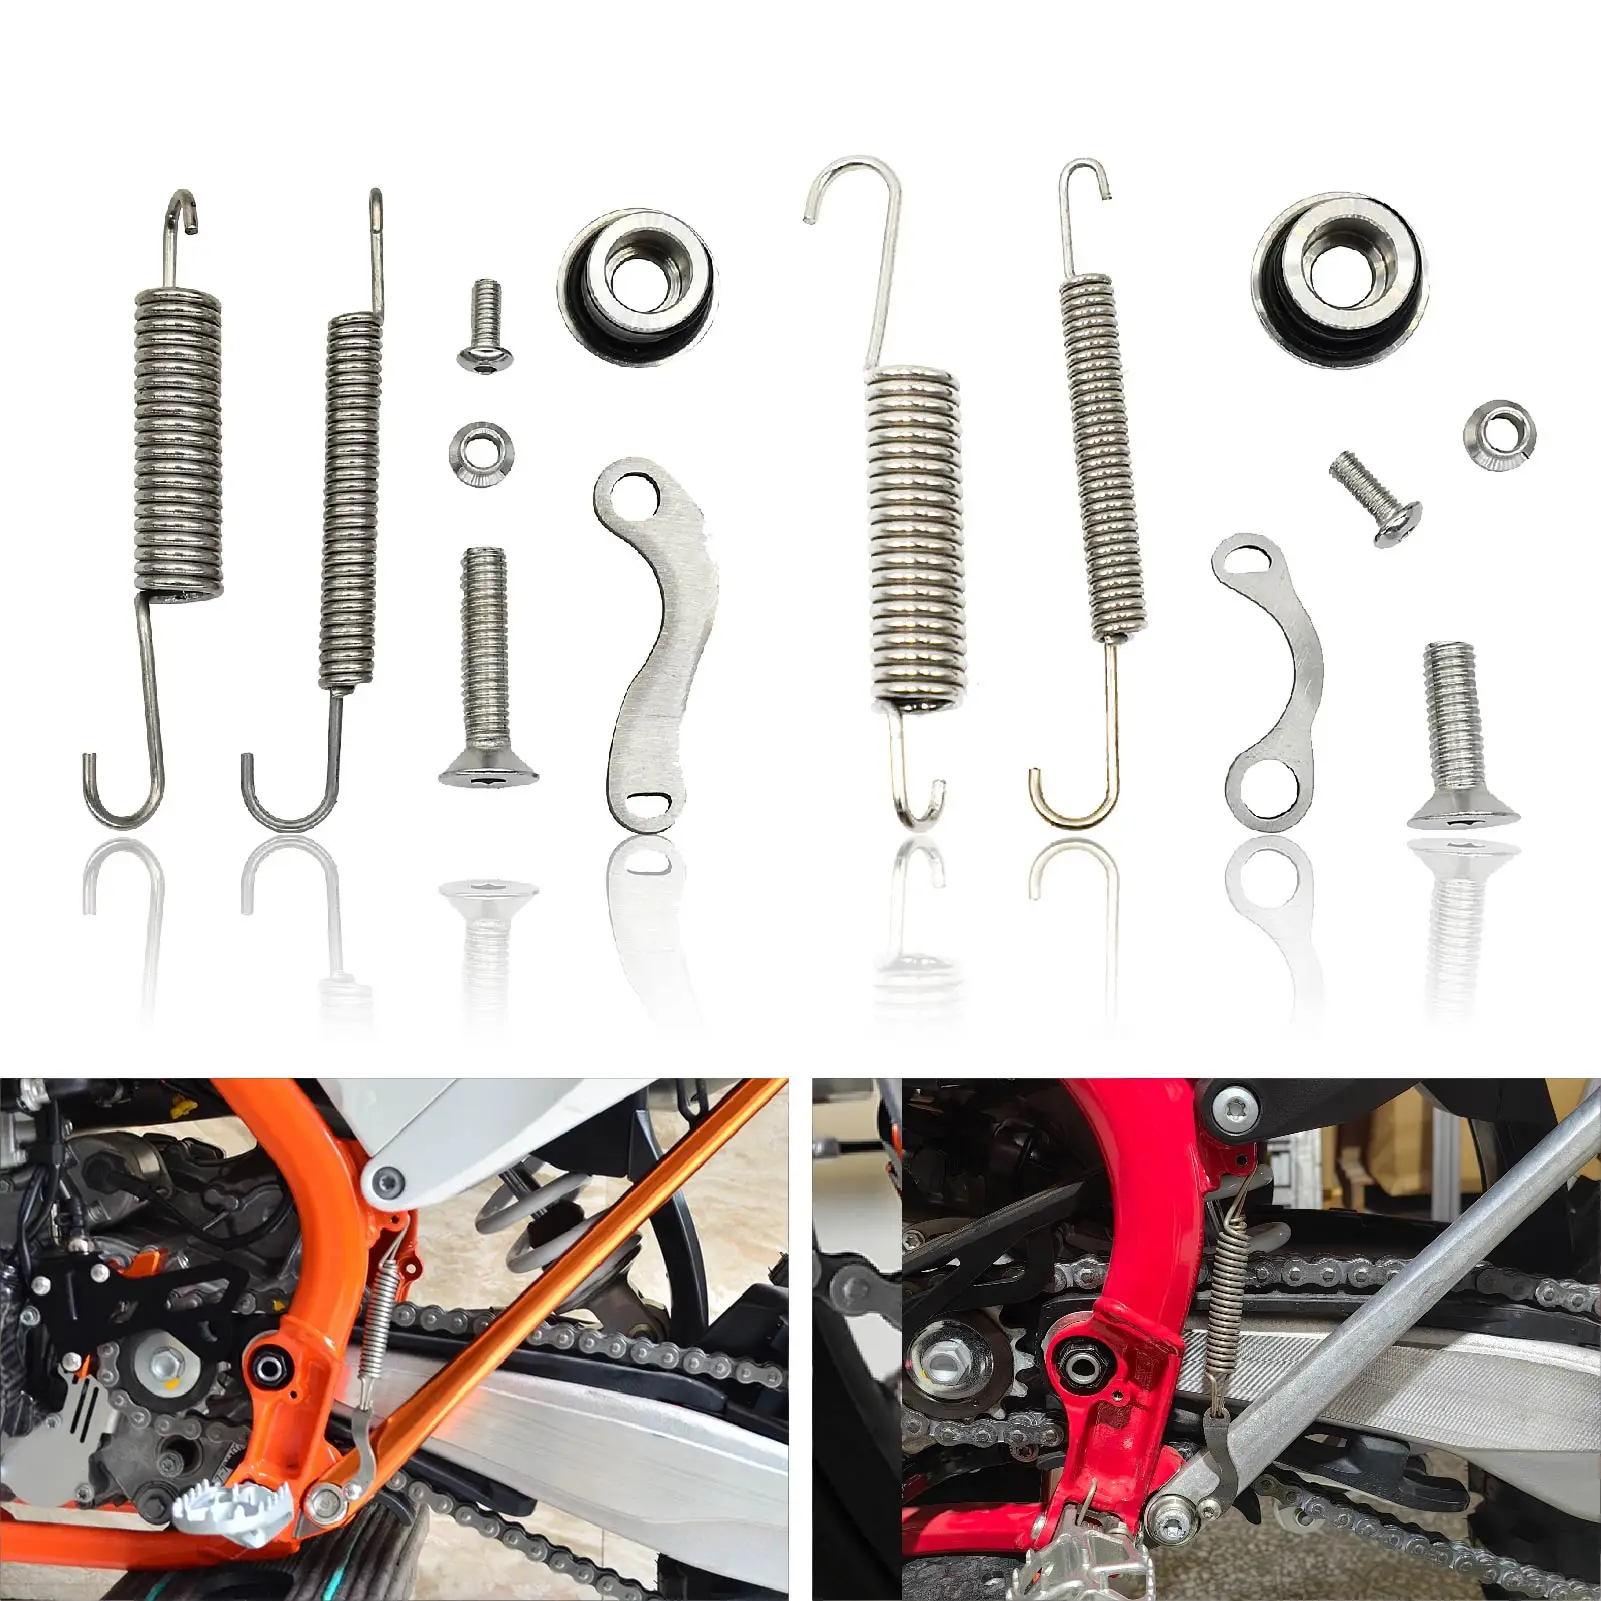 

For Husqvarna FE TE FX TX 2017-2022 For KTM EXC EXCF XC XCF XCW SX SXF 2008-2021 2023 Motocross Kickstand Side Stand Springs Kit